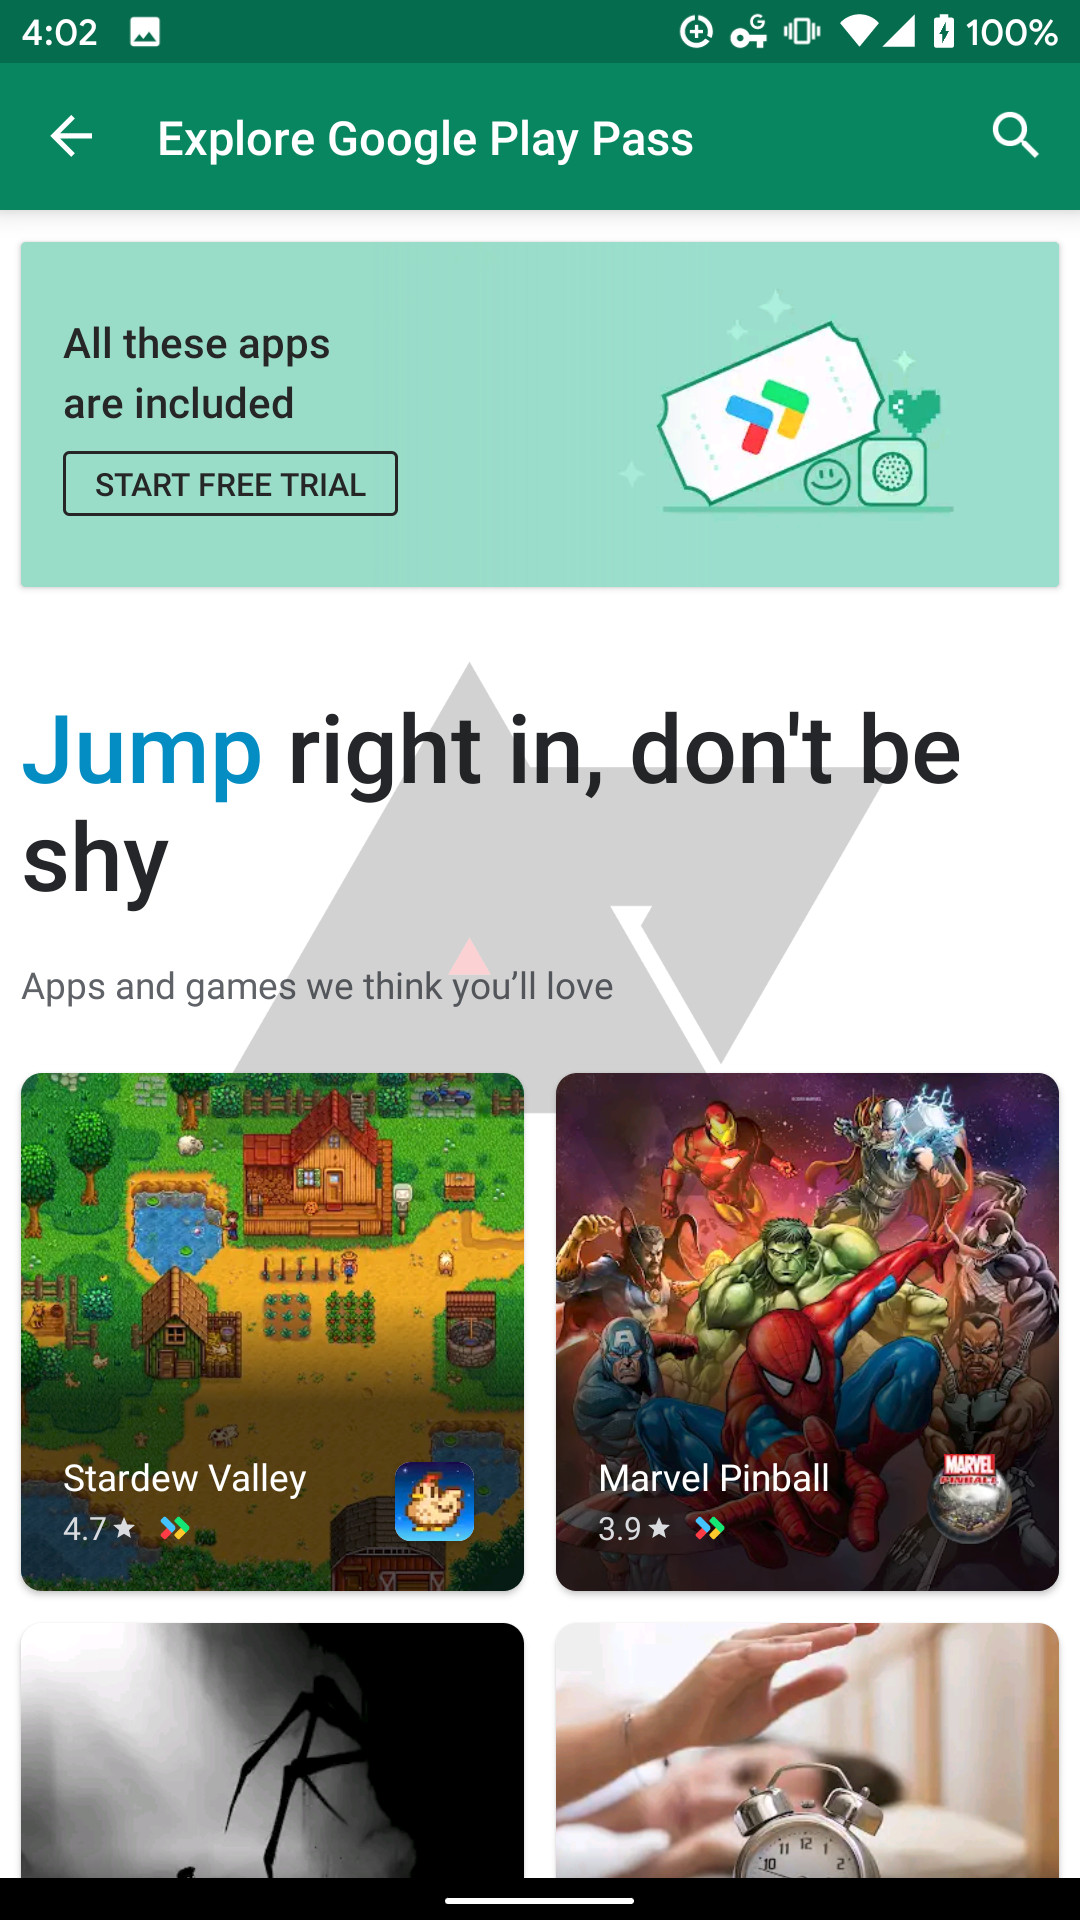 Games on Google Play Pass.